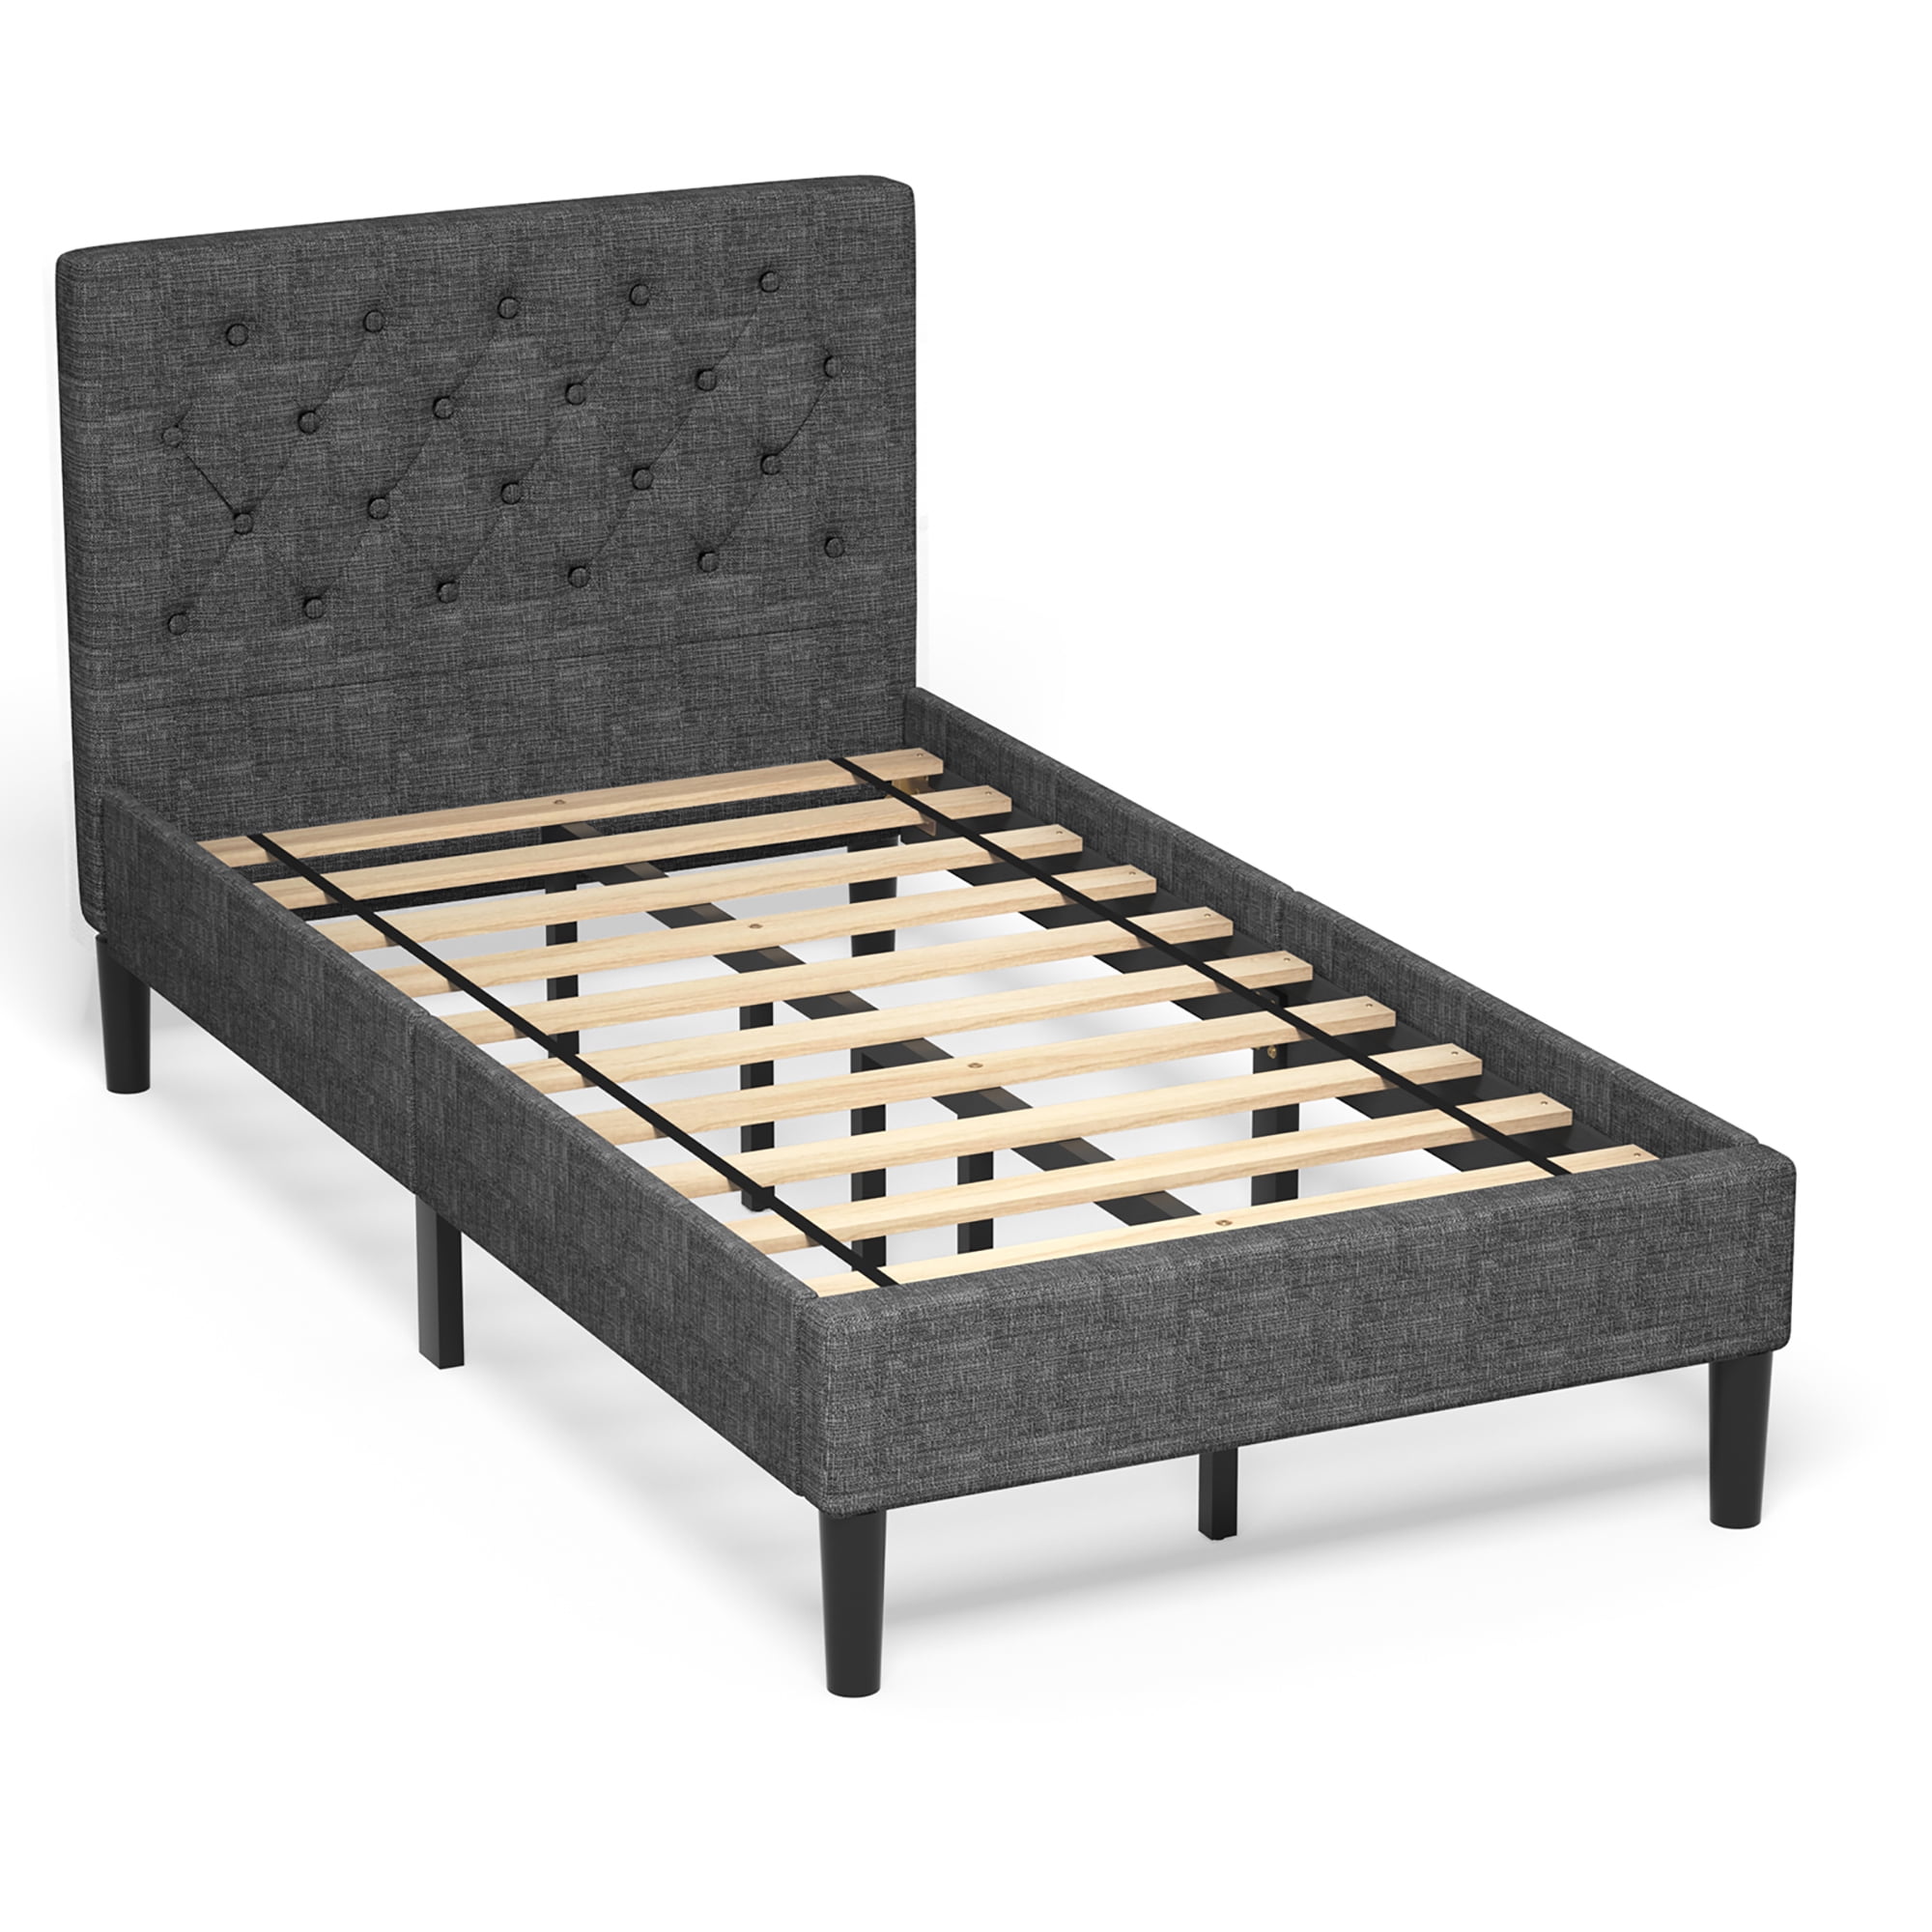 Costway Twin Upholstered Bed Frame, Twin Bed Fabric Headboards